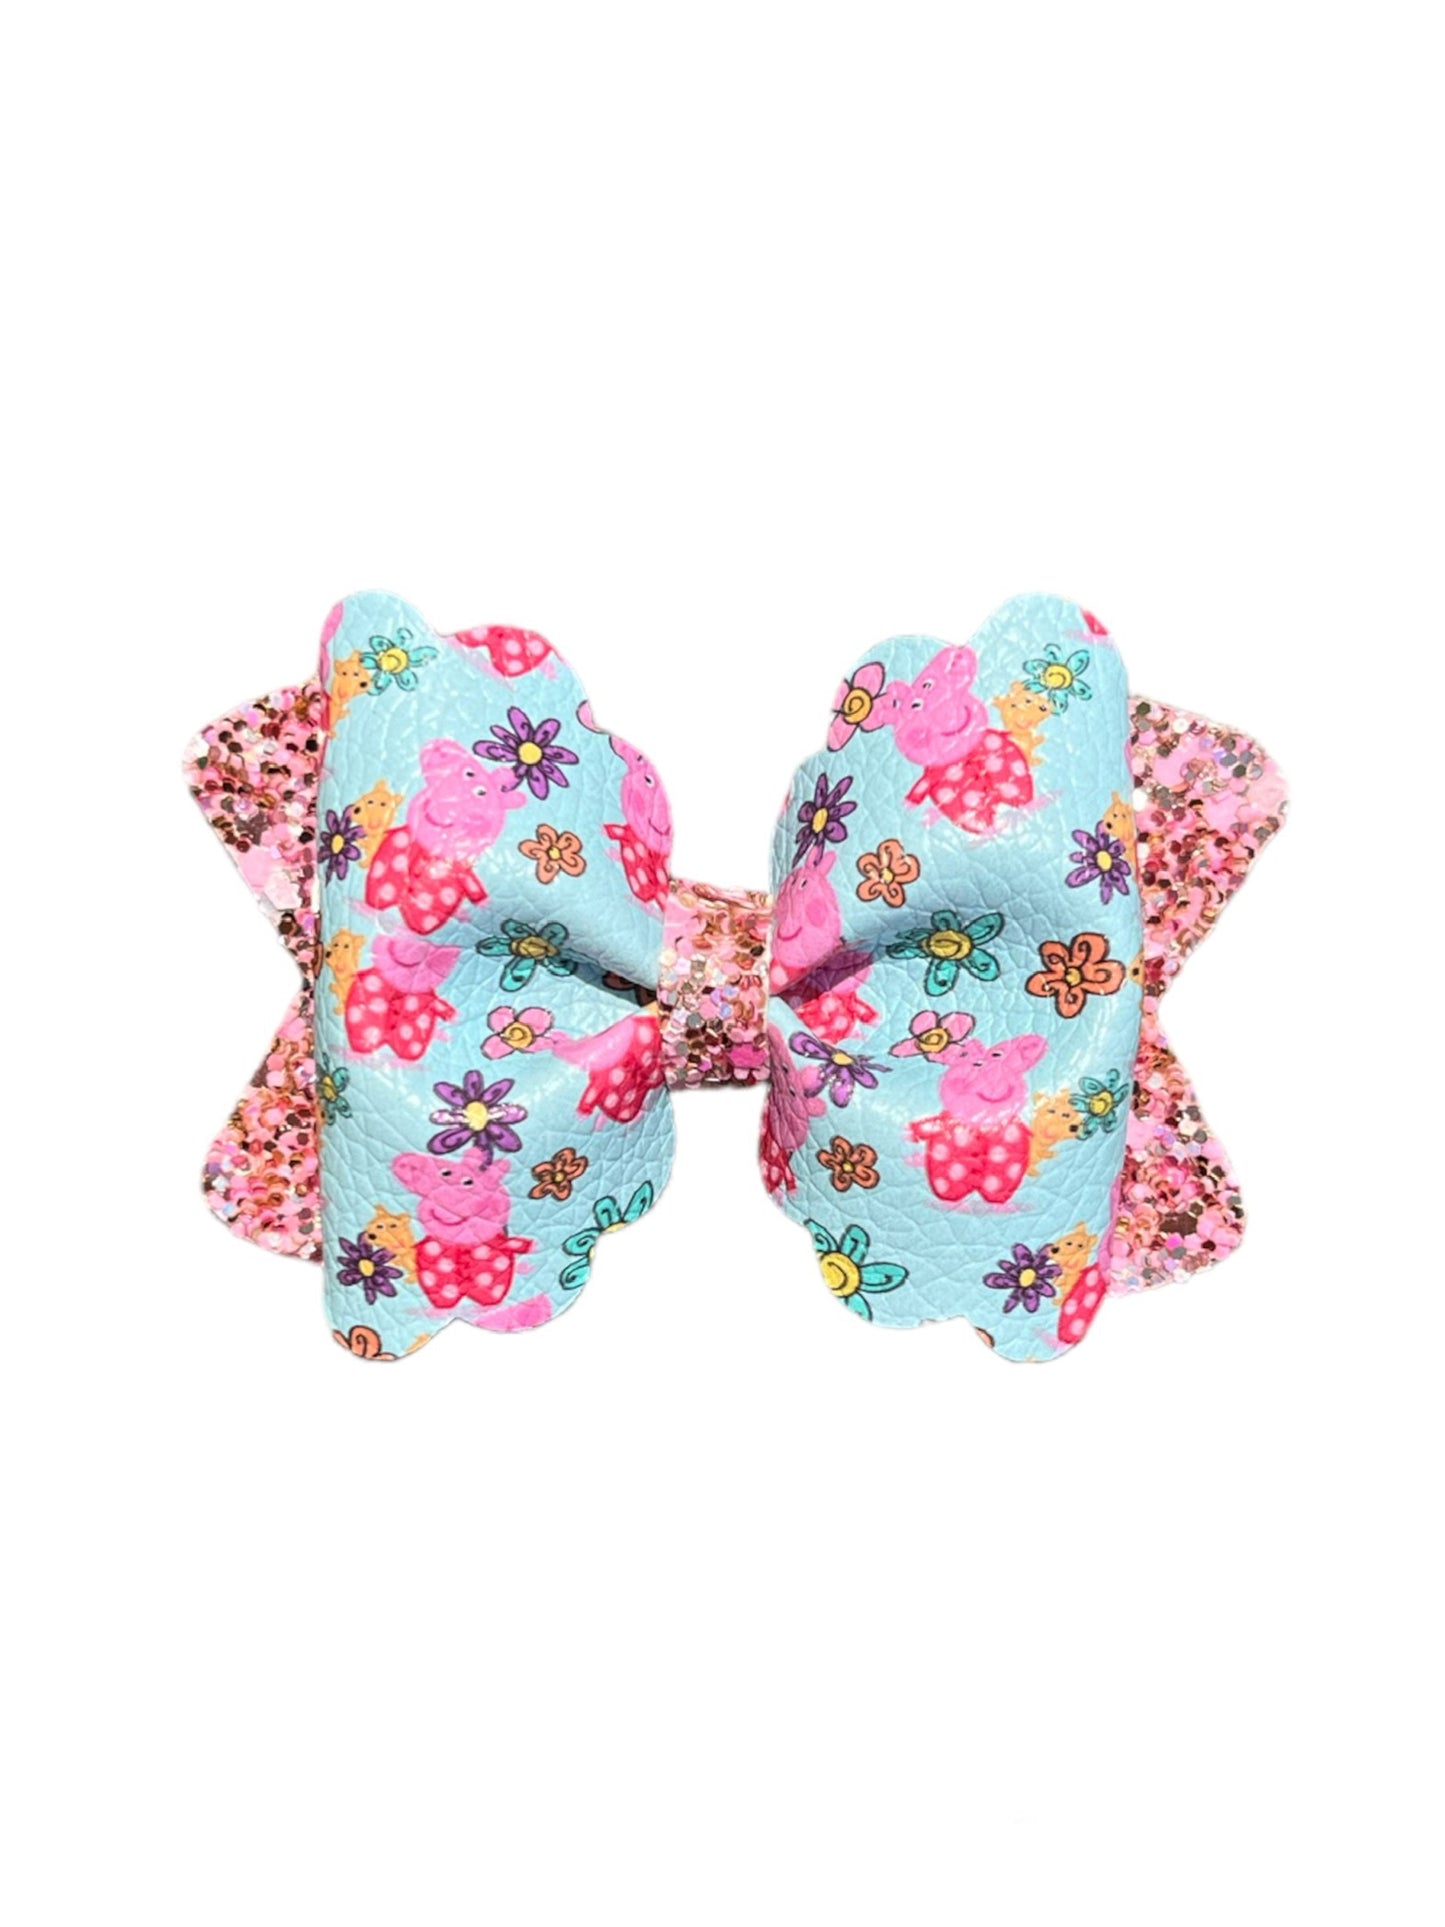 Blue PP Scalloped Bow!